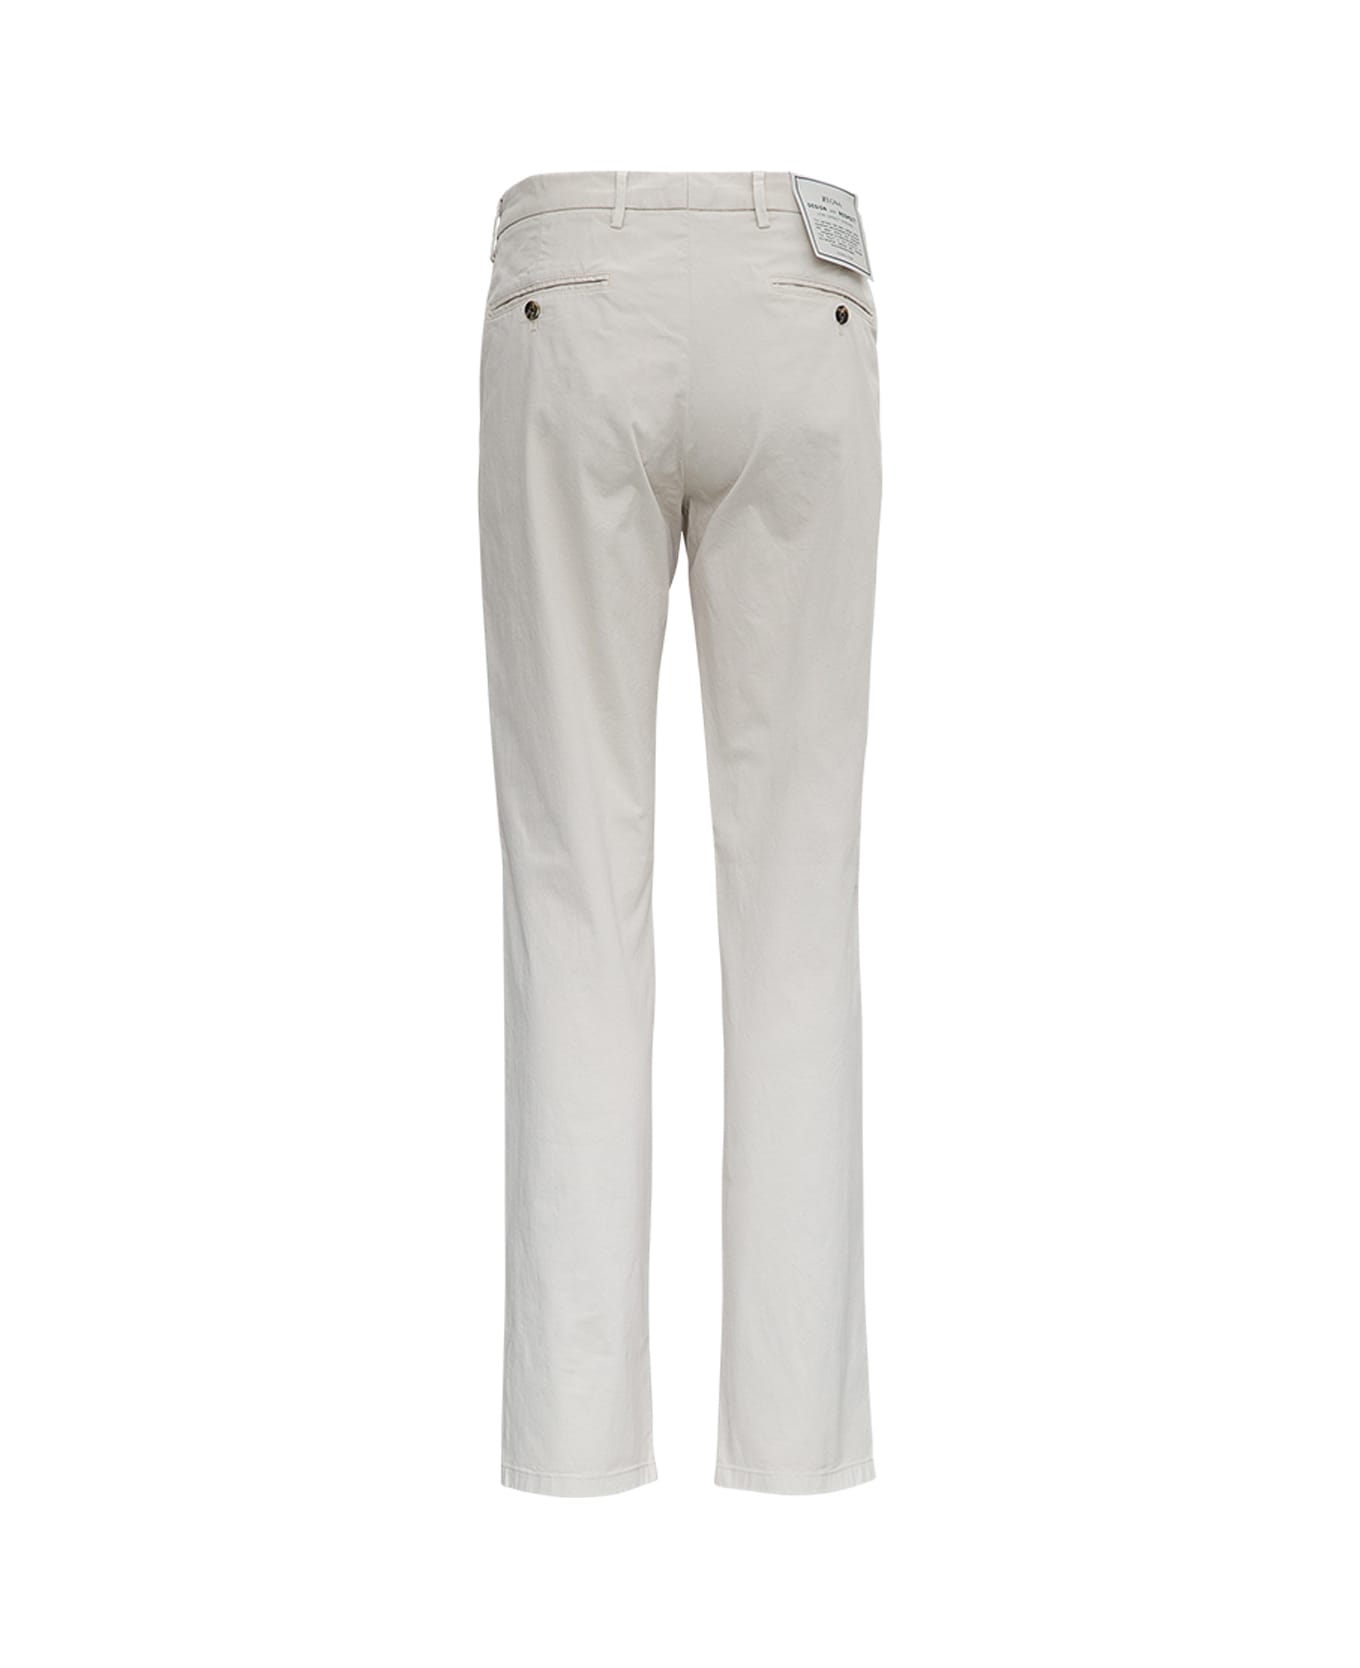 Z Zegna Ivory-colored Cotton Tailored Trousers - White